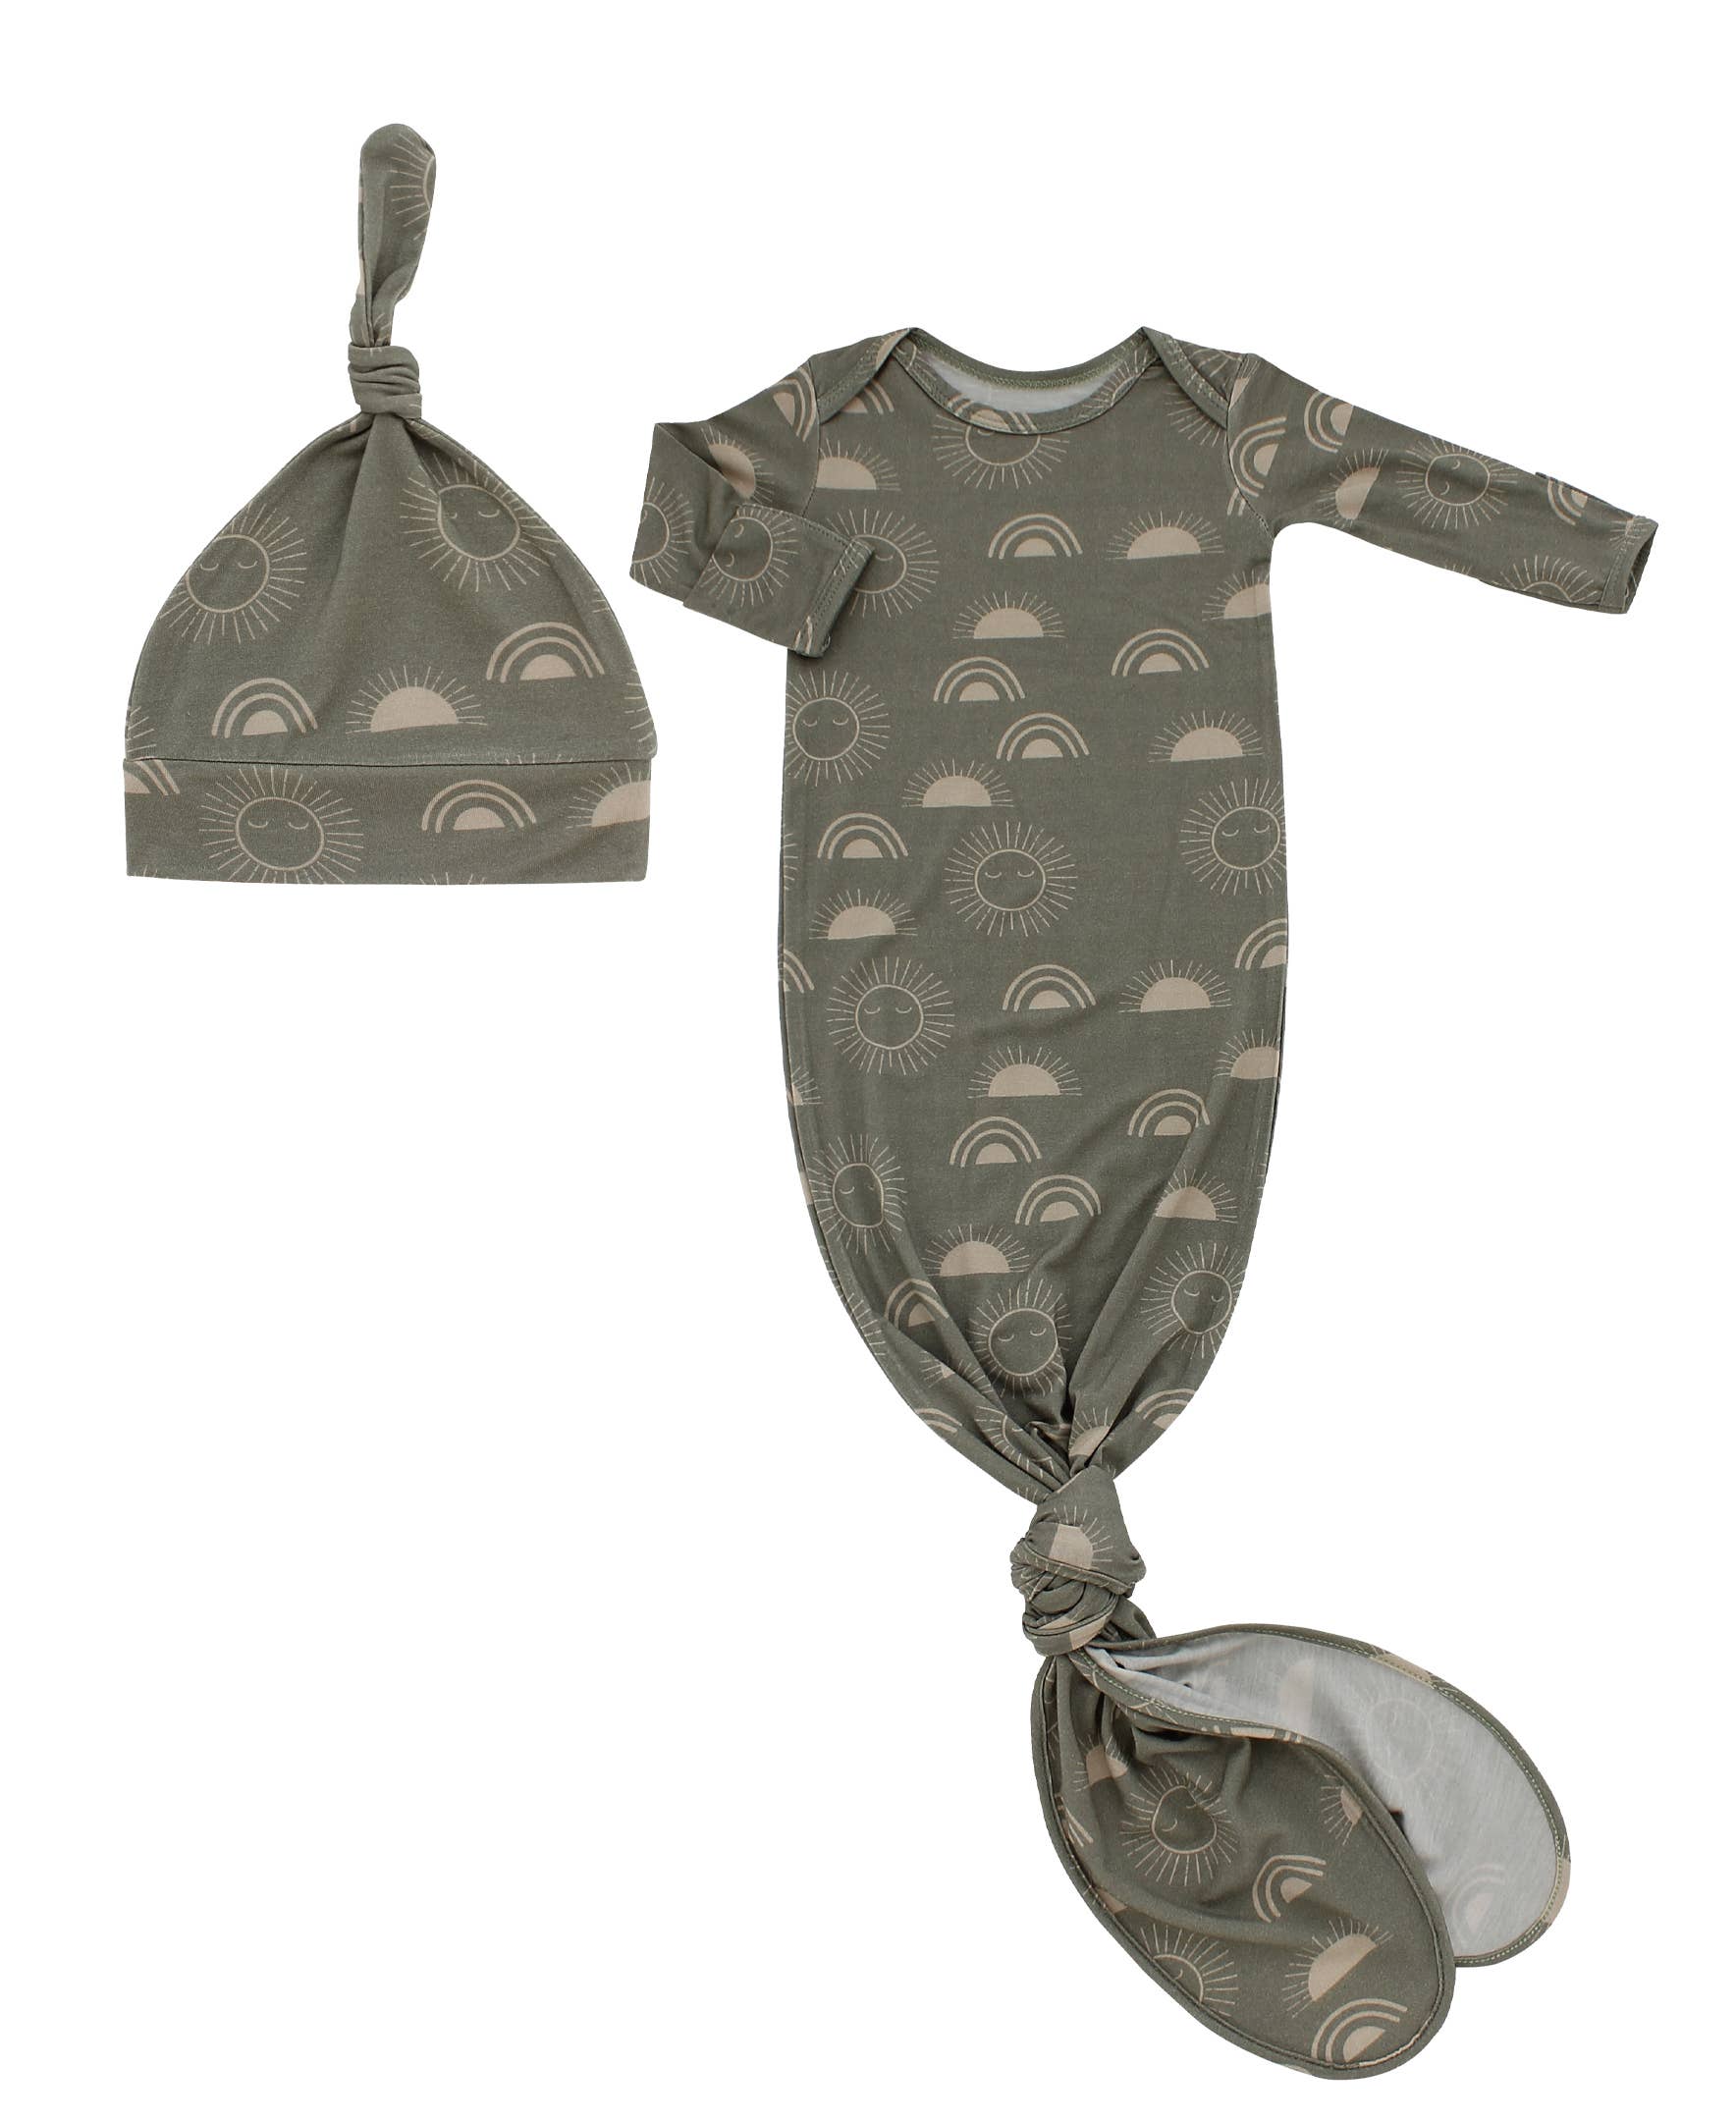 The softest bamboo gowns for newborns! This baby gift set is perfect for newborn babies and moms.